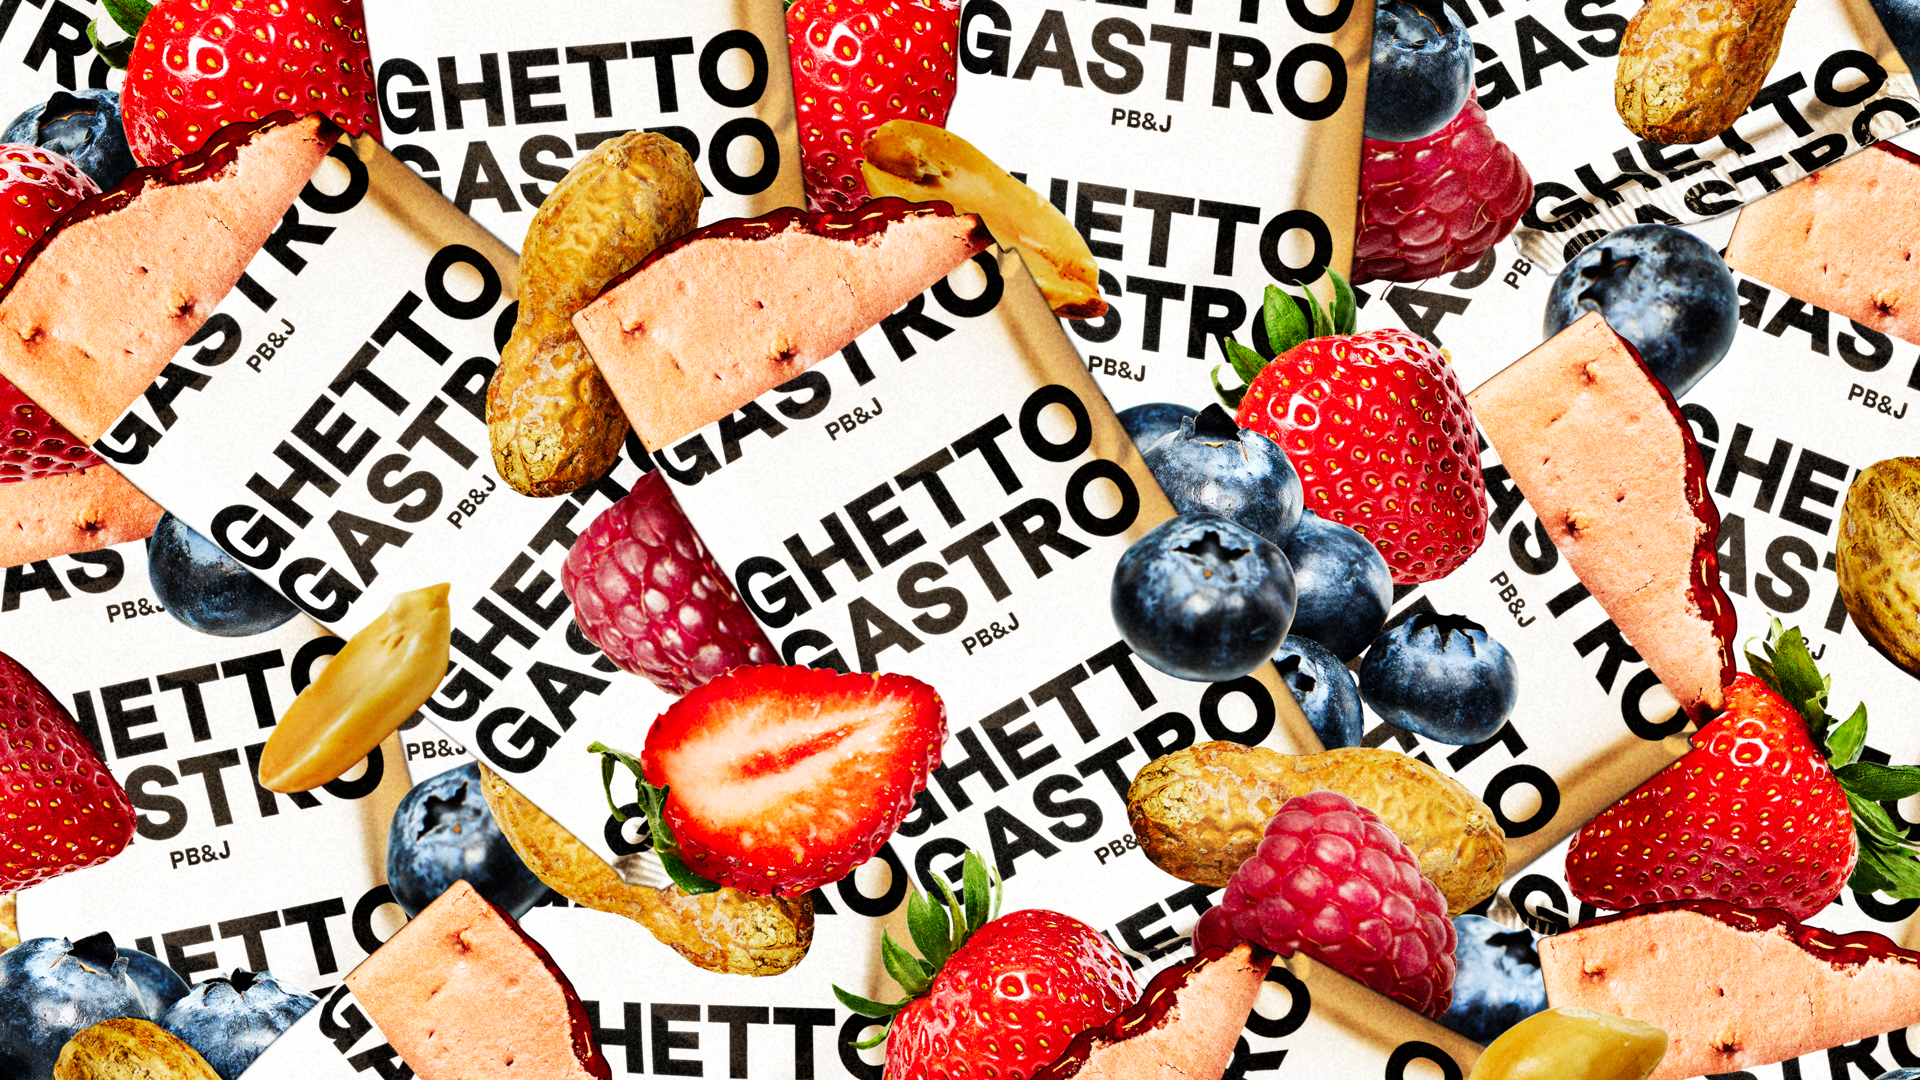 Ghetto Gastro Is Ready For Their Target Closeup